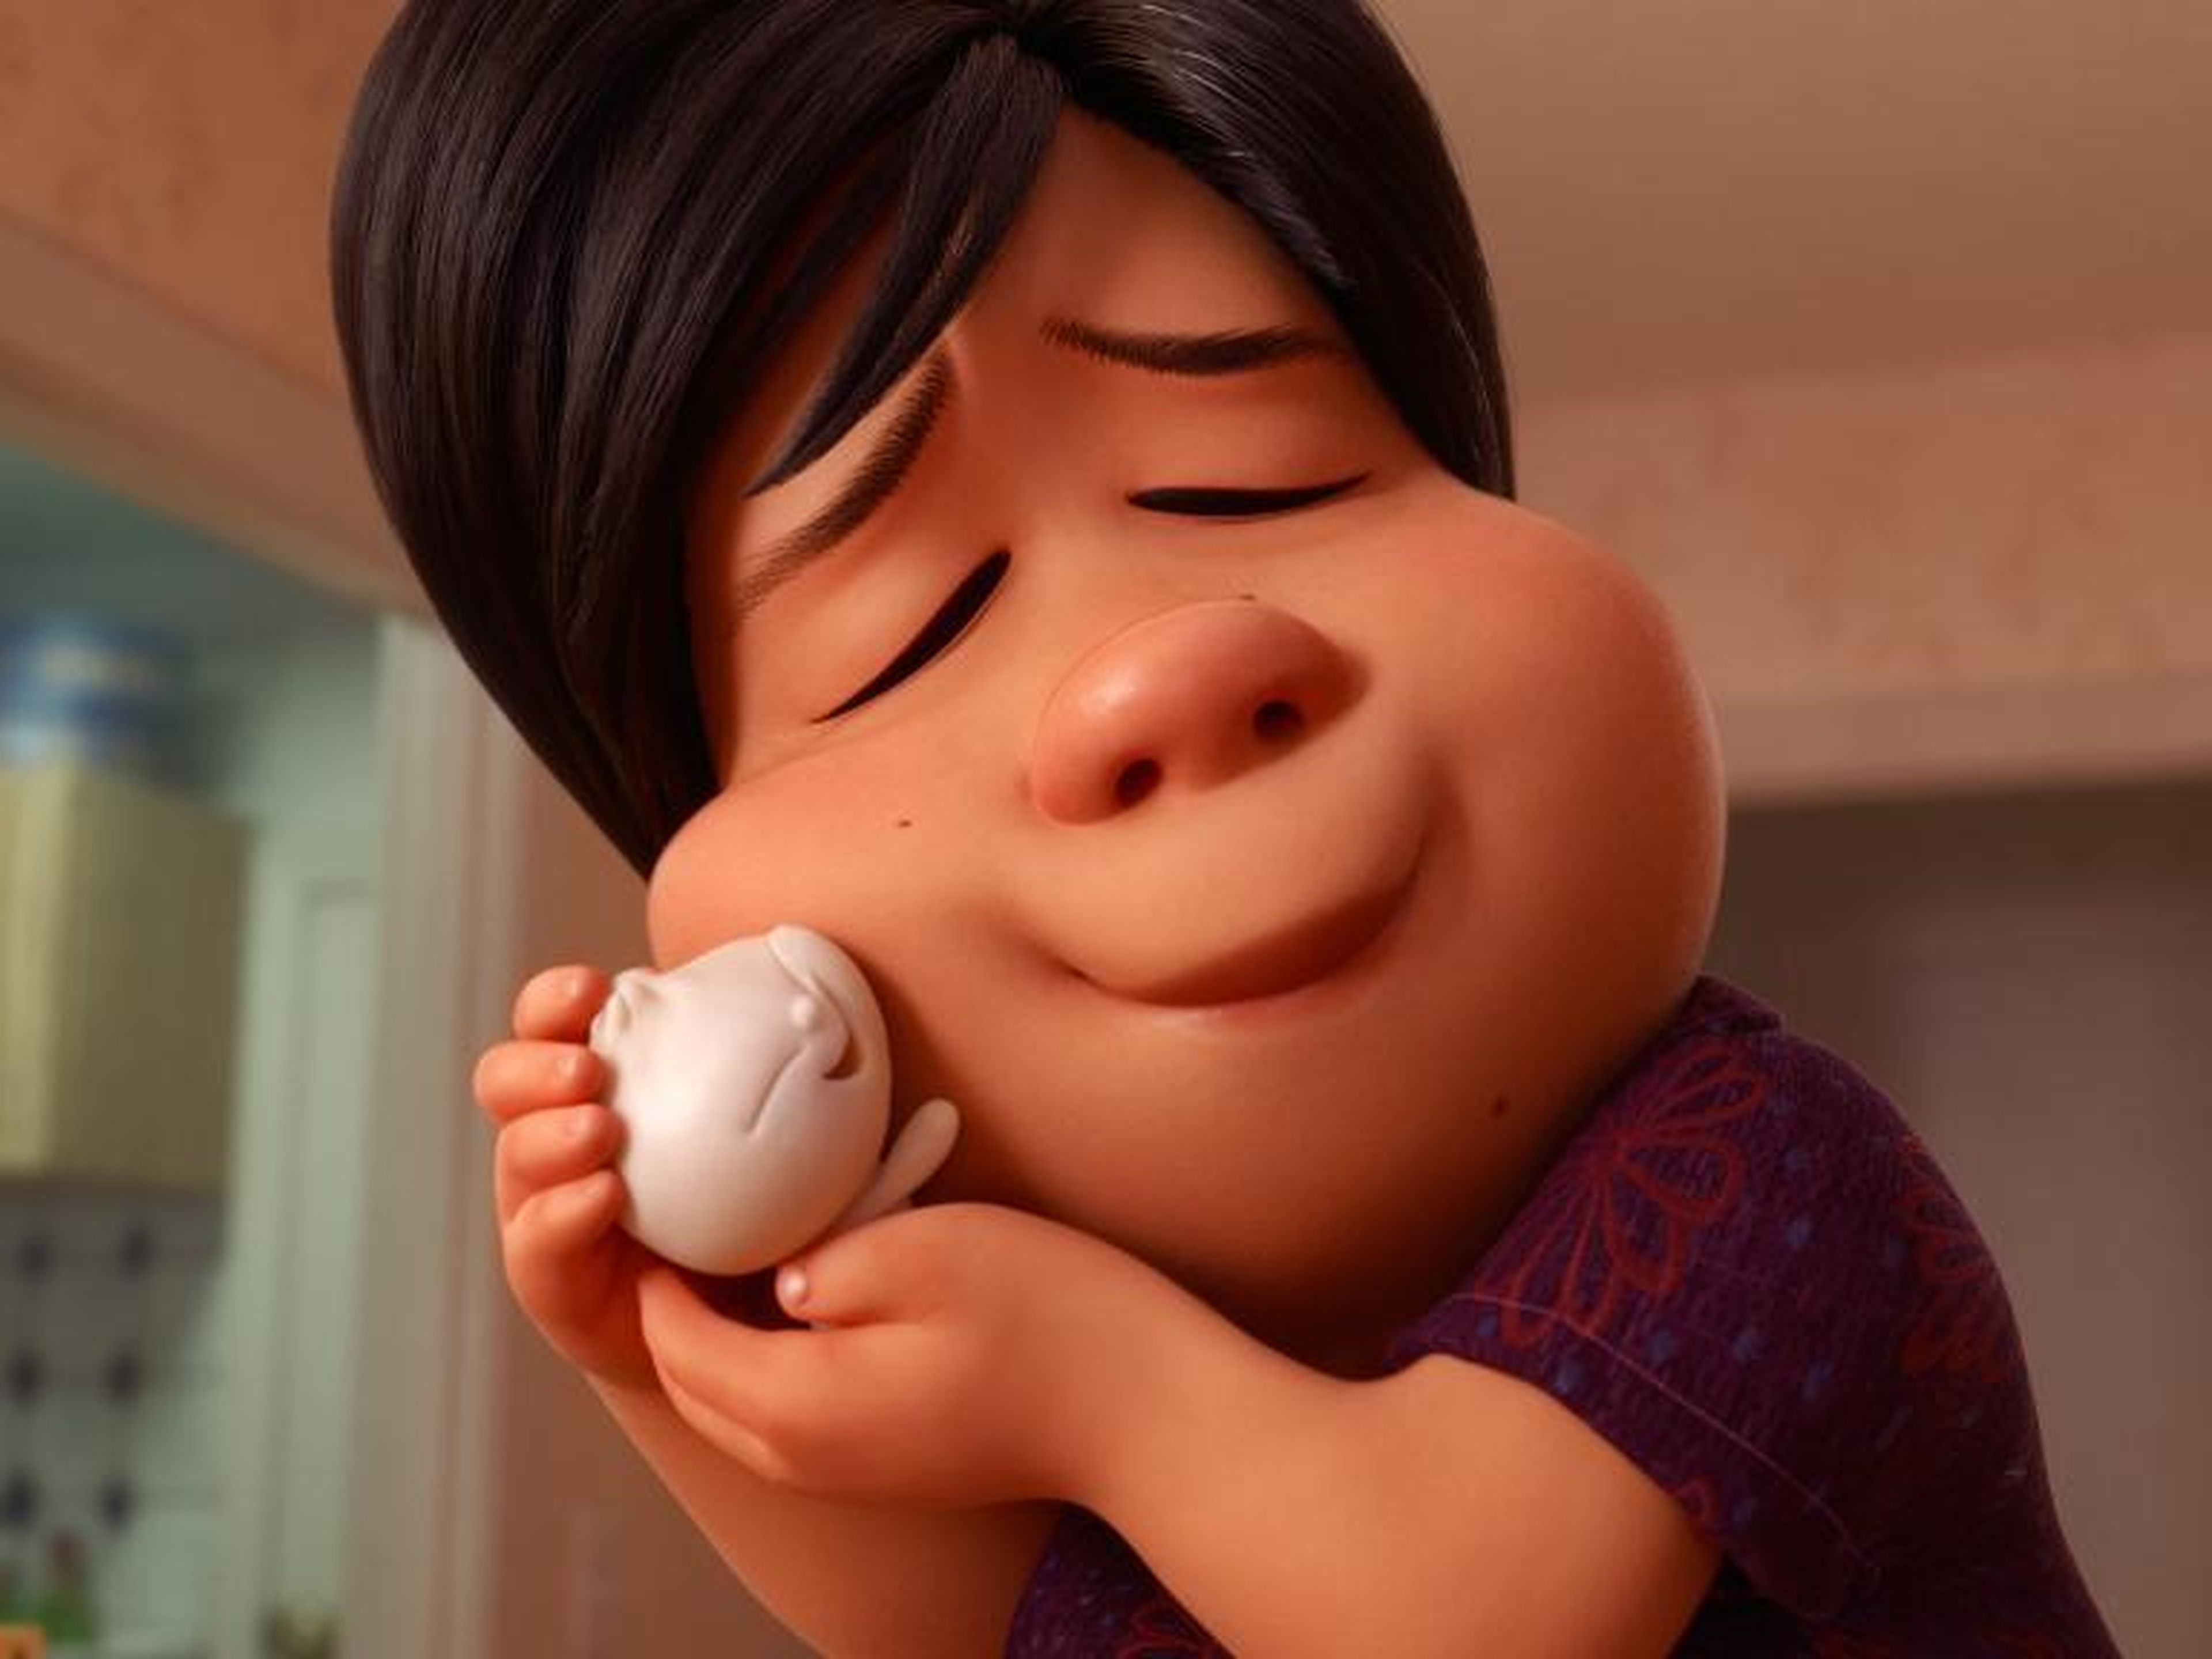 "Bao" was all about the woes of empty-nesting and parenthood.